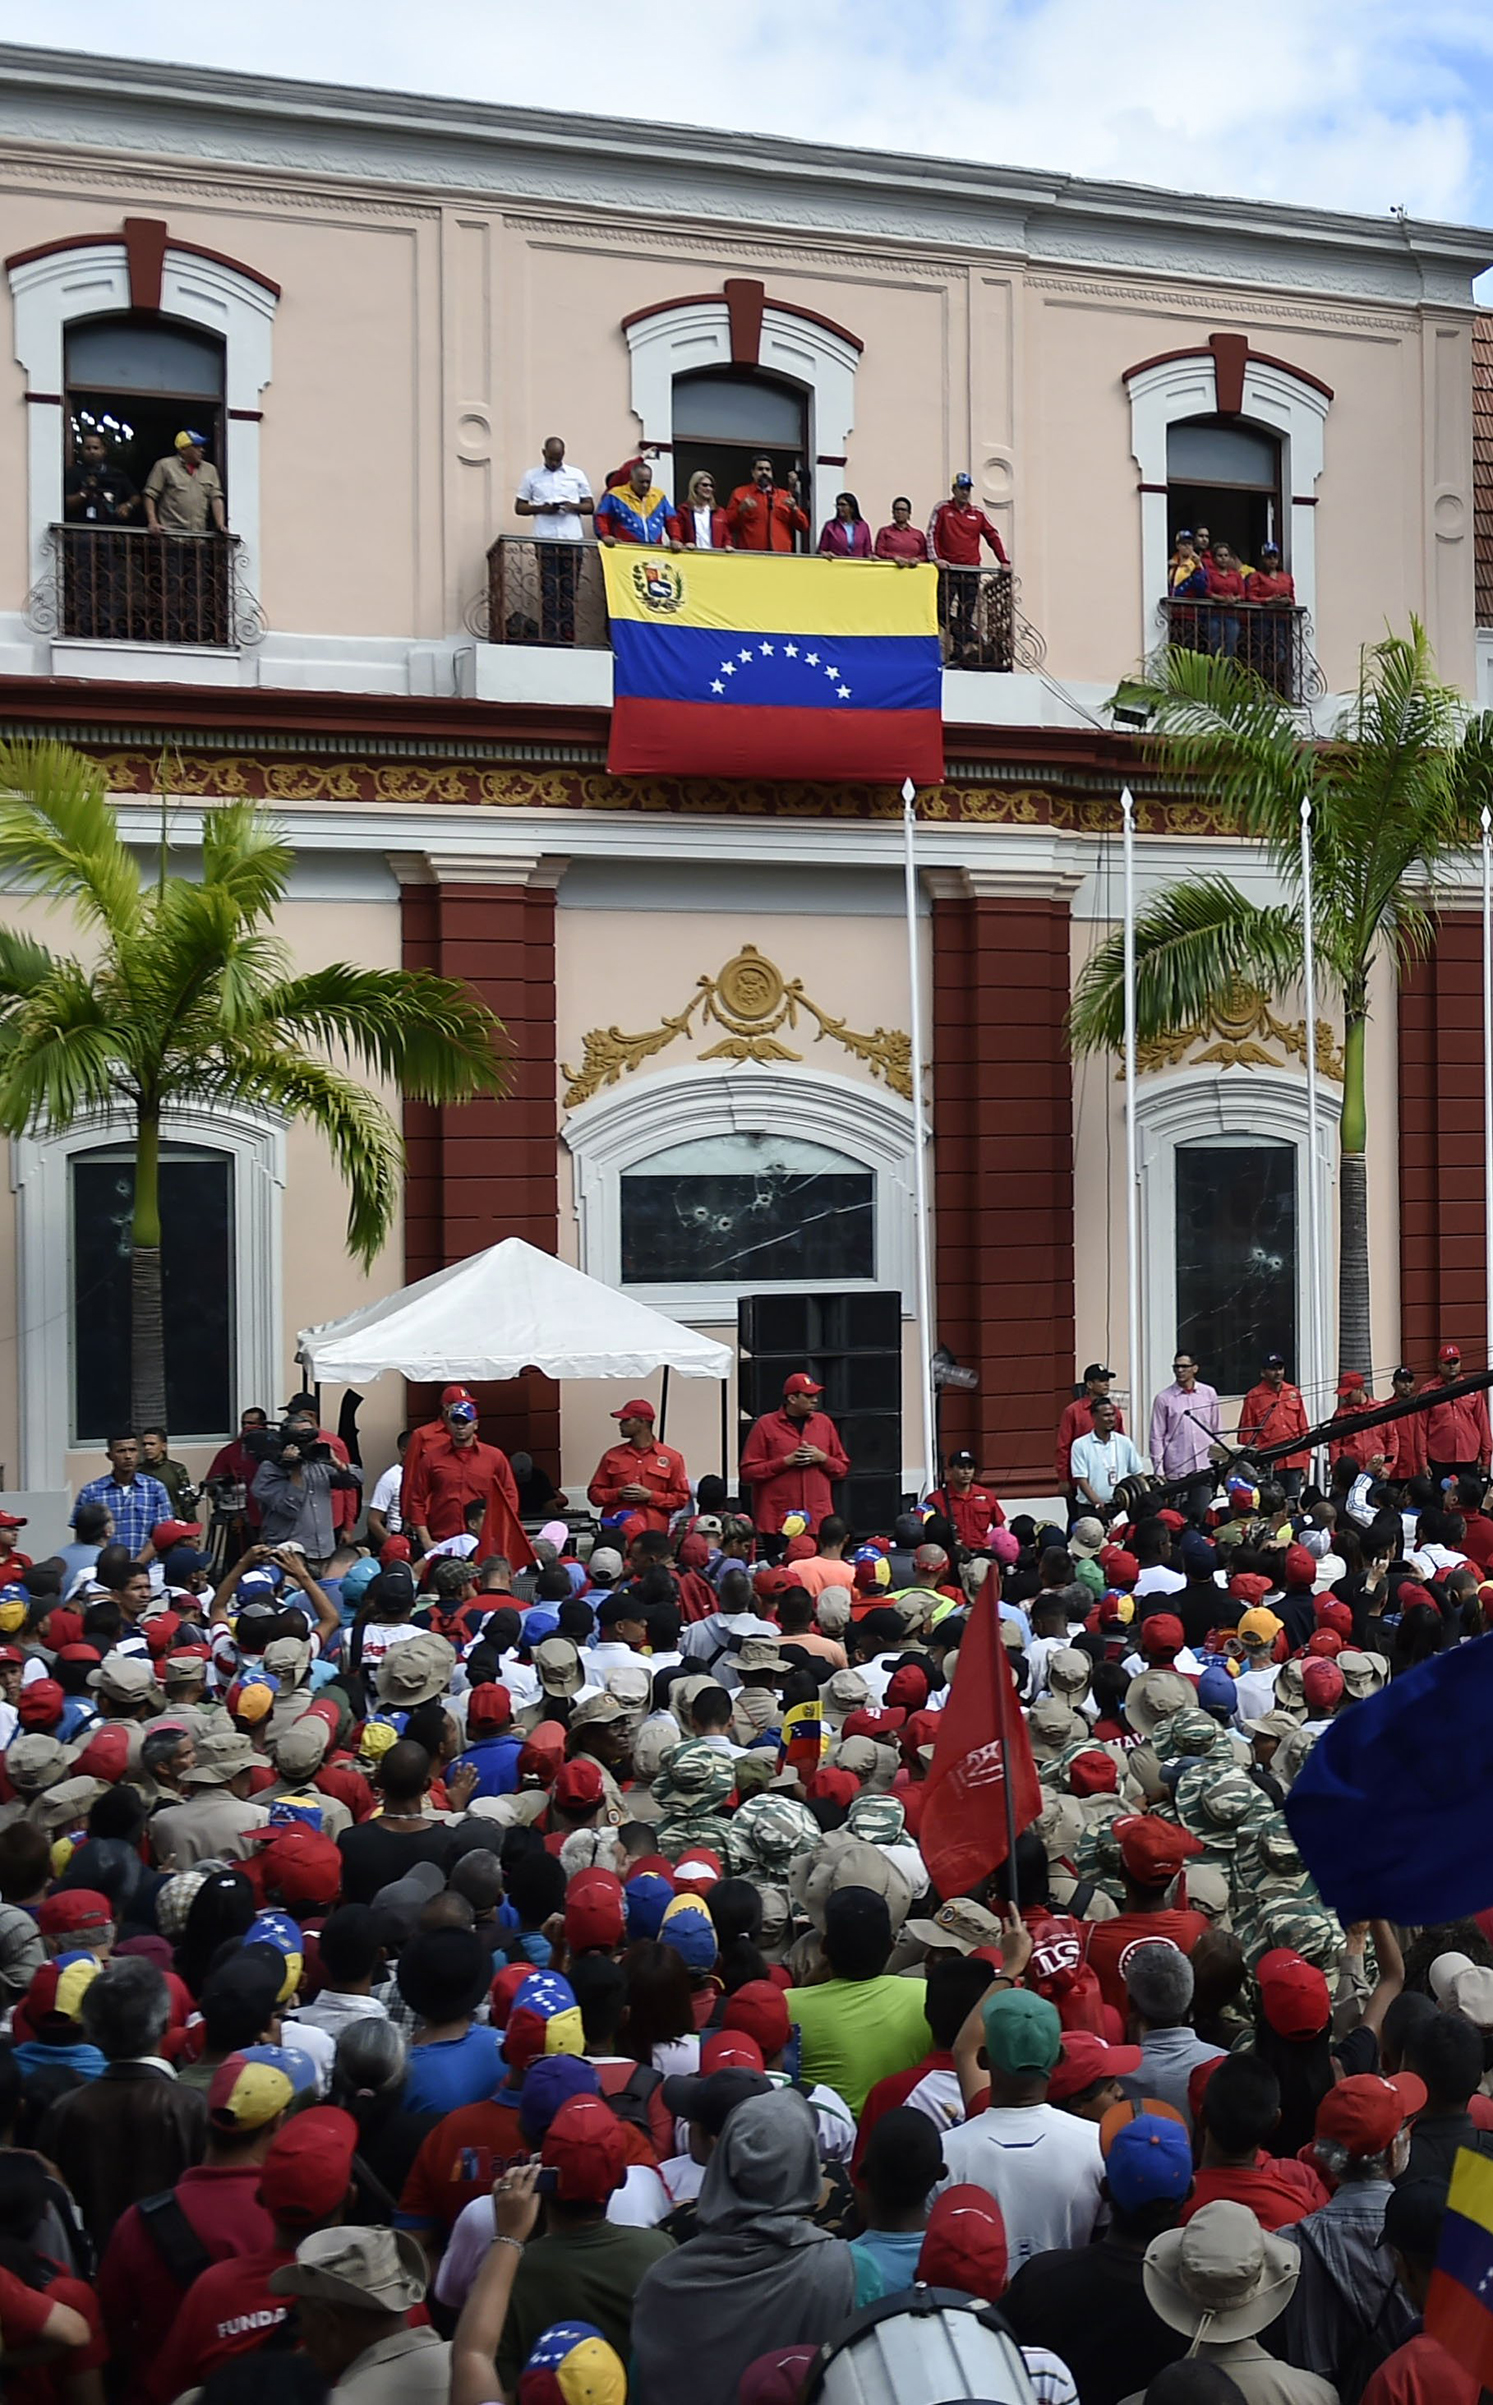 President Nicolás Maduro announces he will break off diplomatic ties with the U.S., in response to Trump's acknowledgment of Guaidó as "interim president," during a gathering in Caracas on Jan. 23, 2019. (Luis Robayo—AFP/Getty Images)